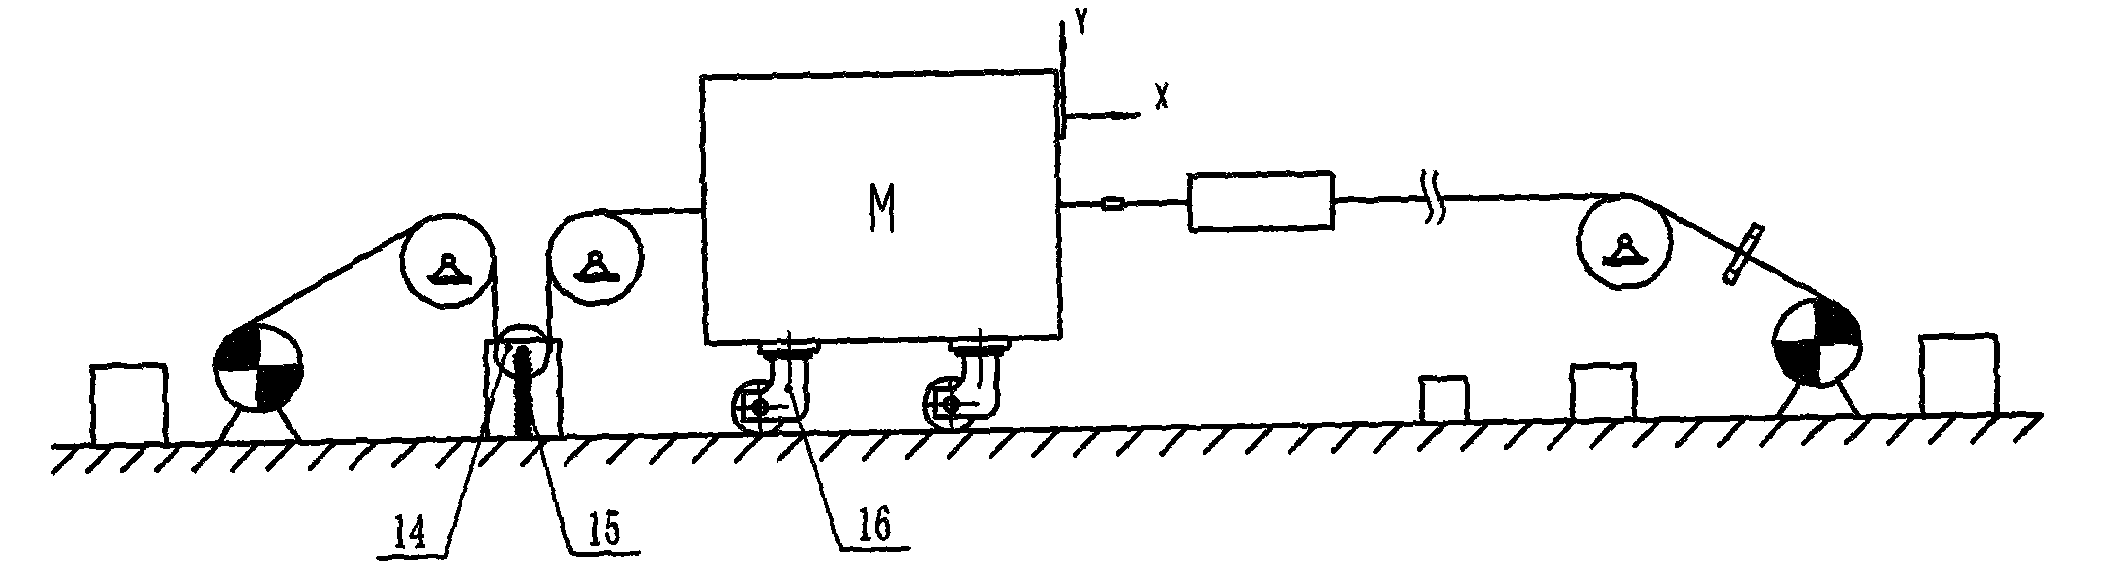 Test stand and method for ultra-deep mine hoisting systems